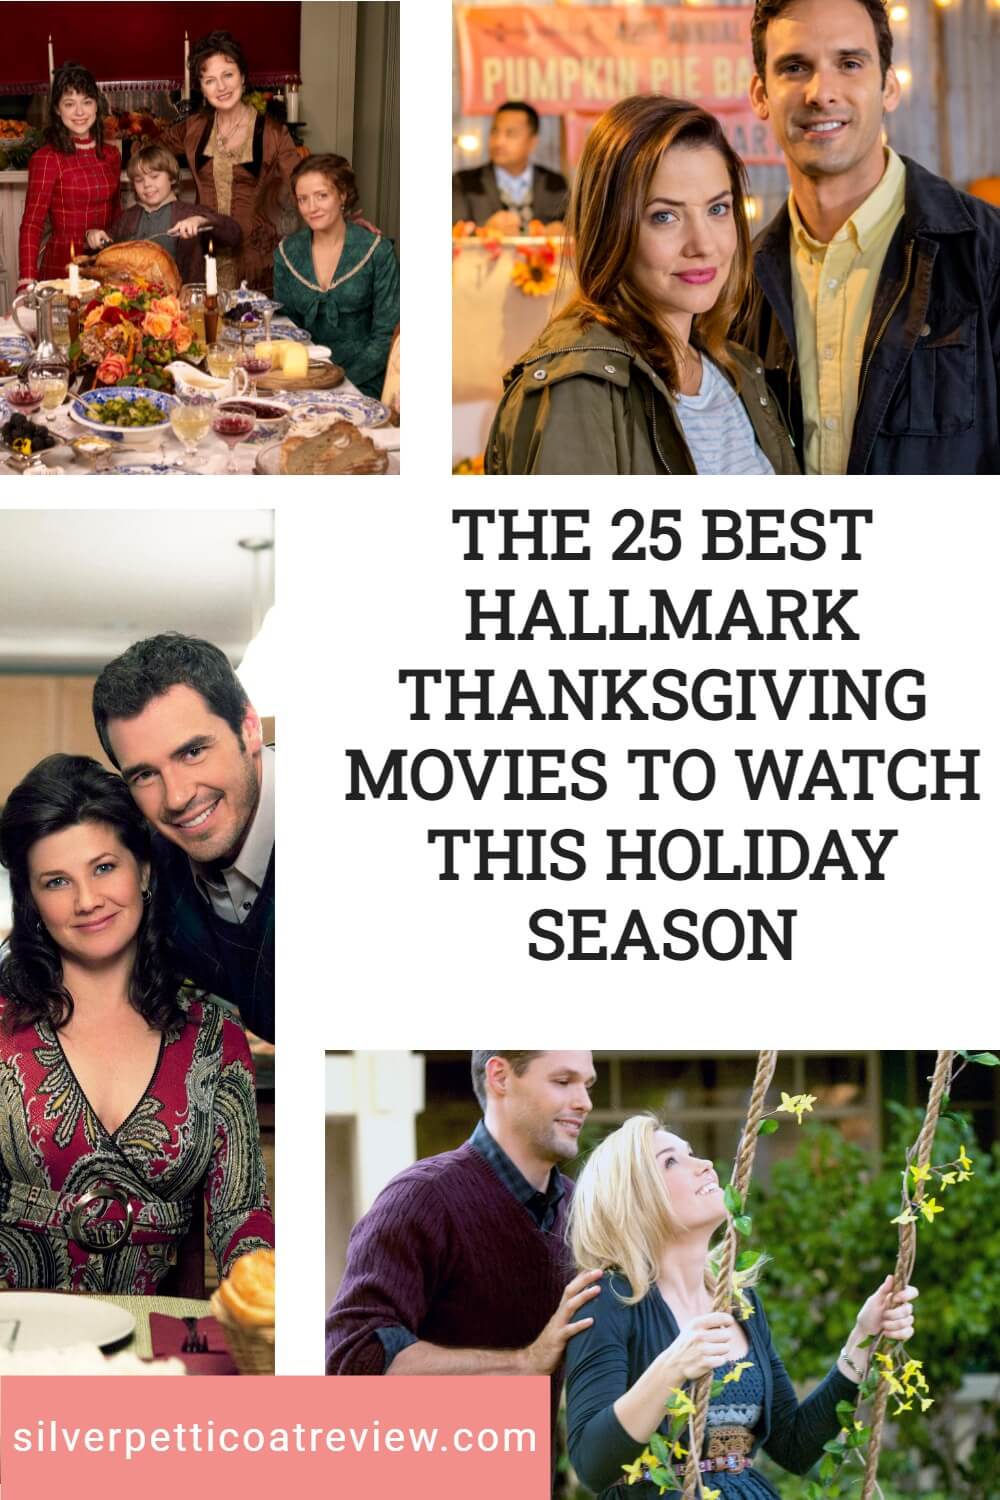 The 25 Best Hallmark Thanksgiving Movies to Watch This Holiday Season